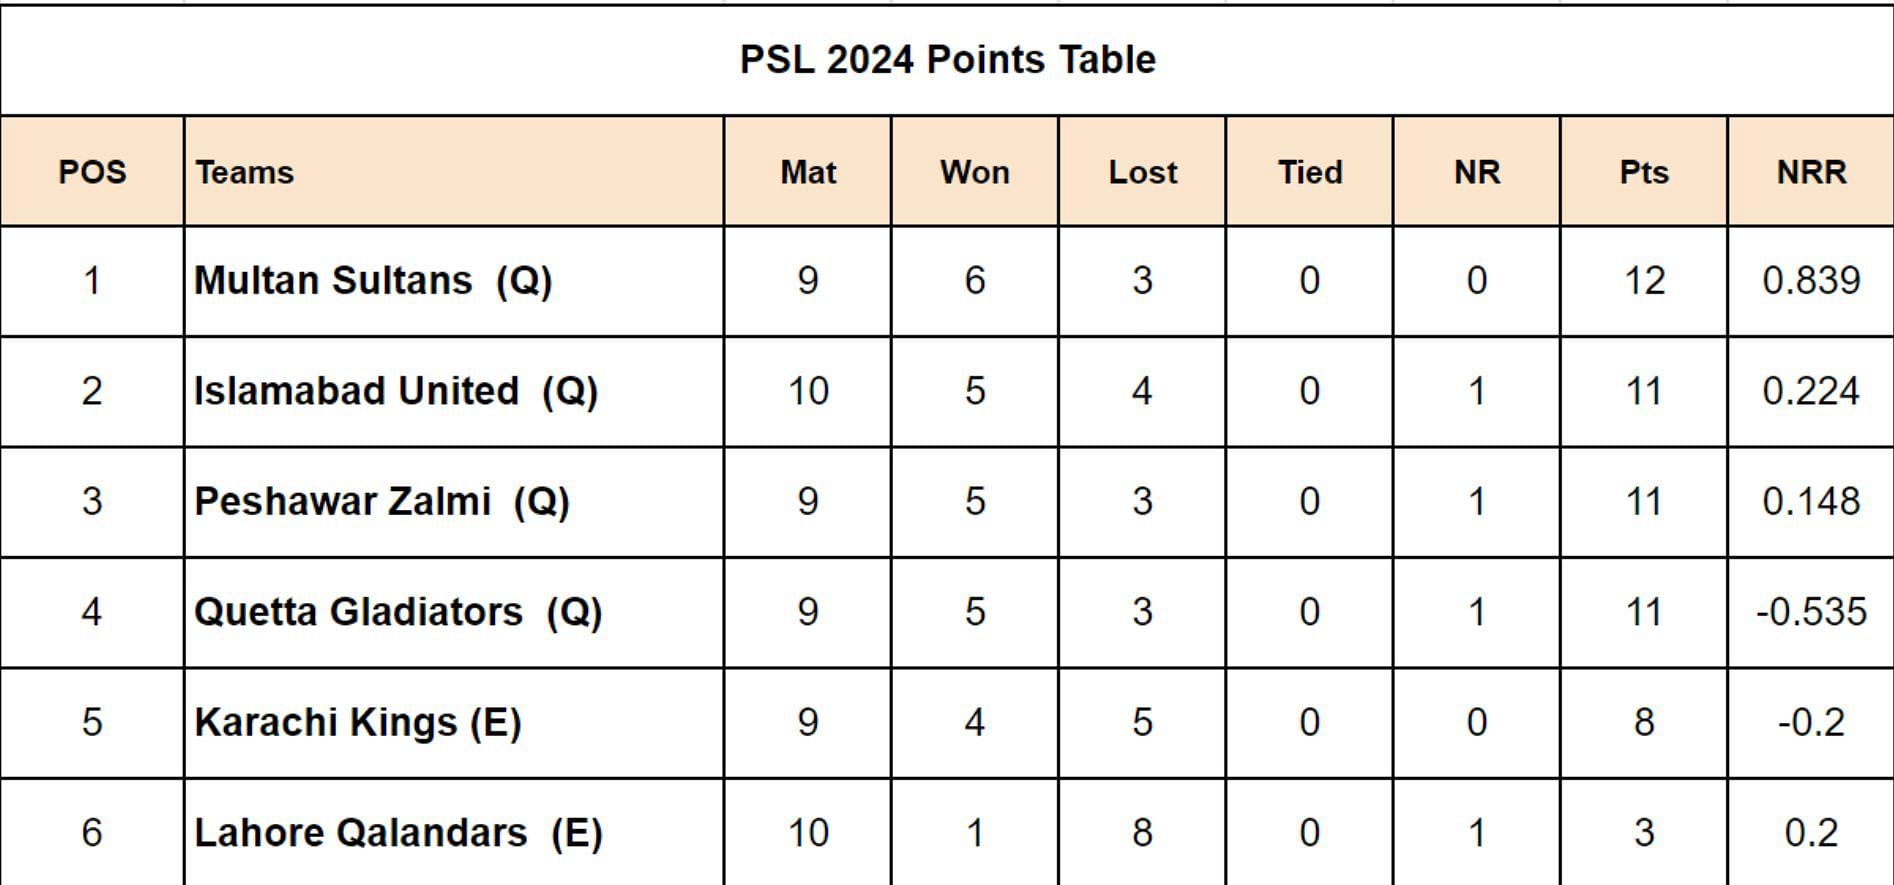 PSL 2024 Points Table Updated after Match 28